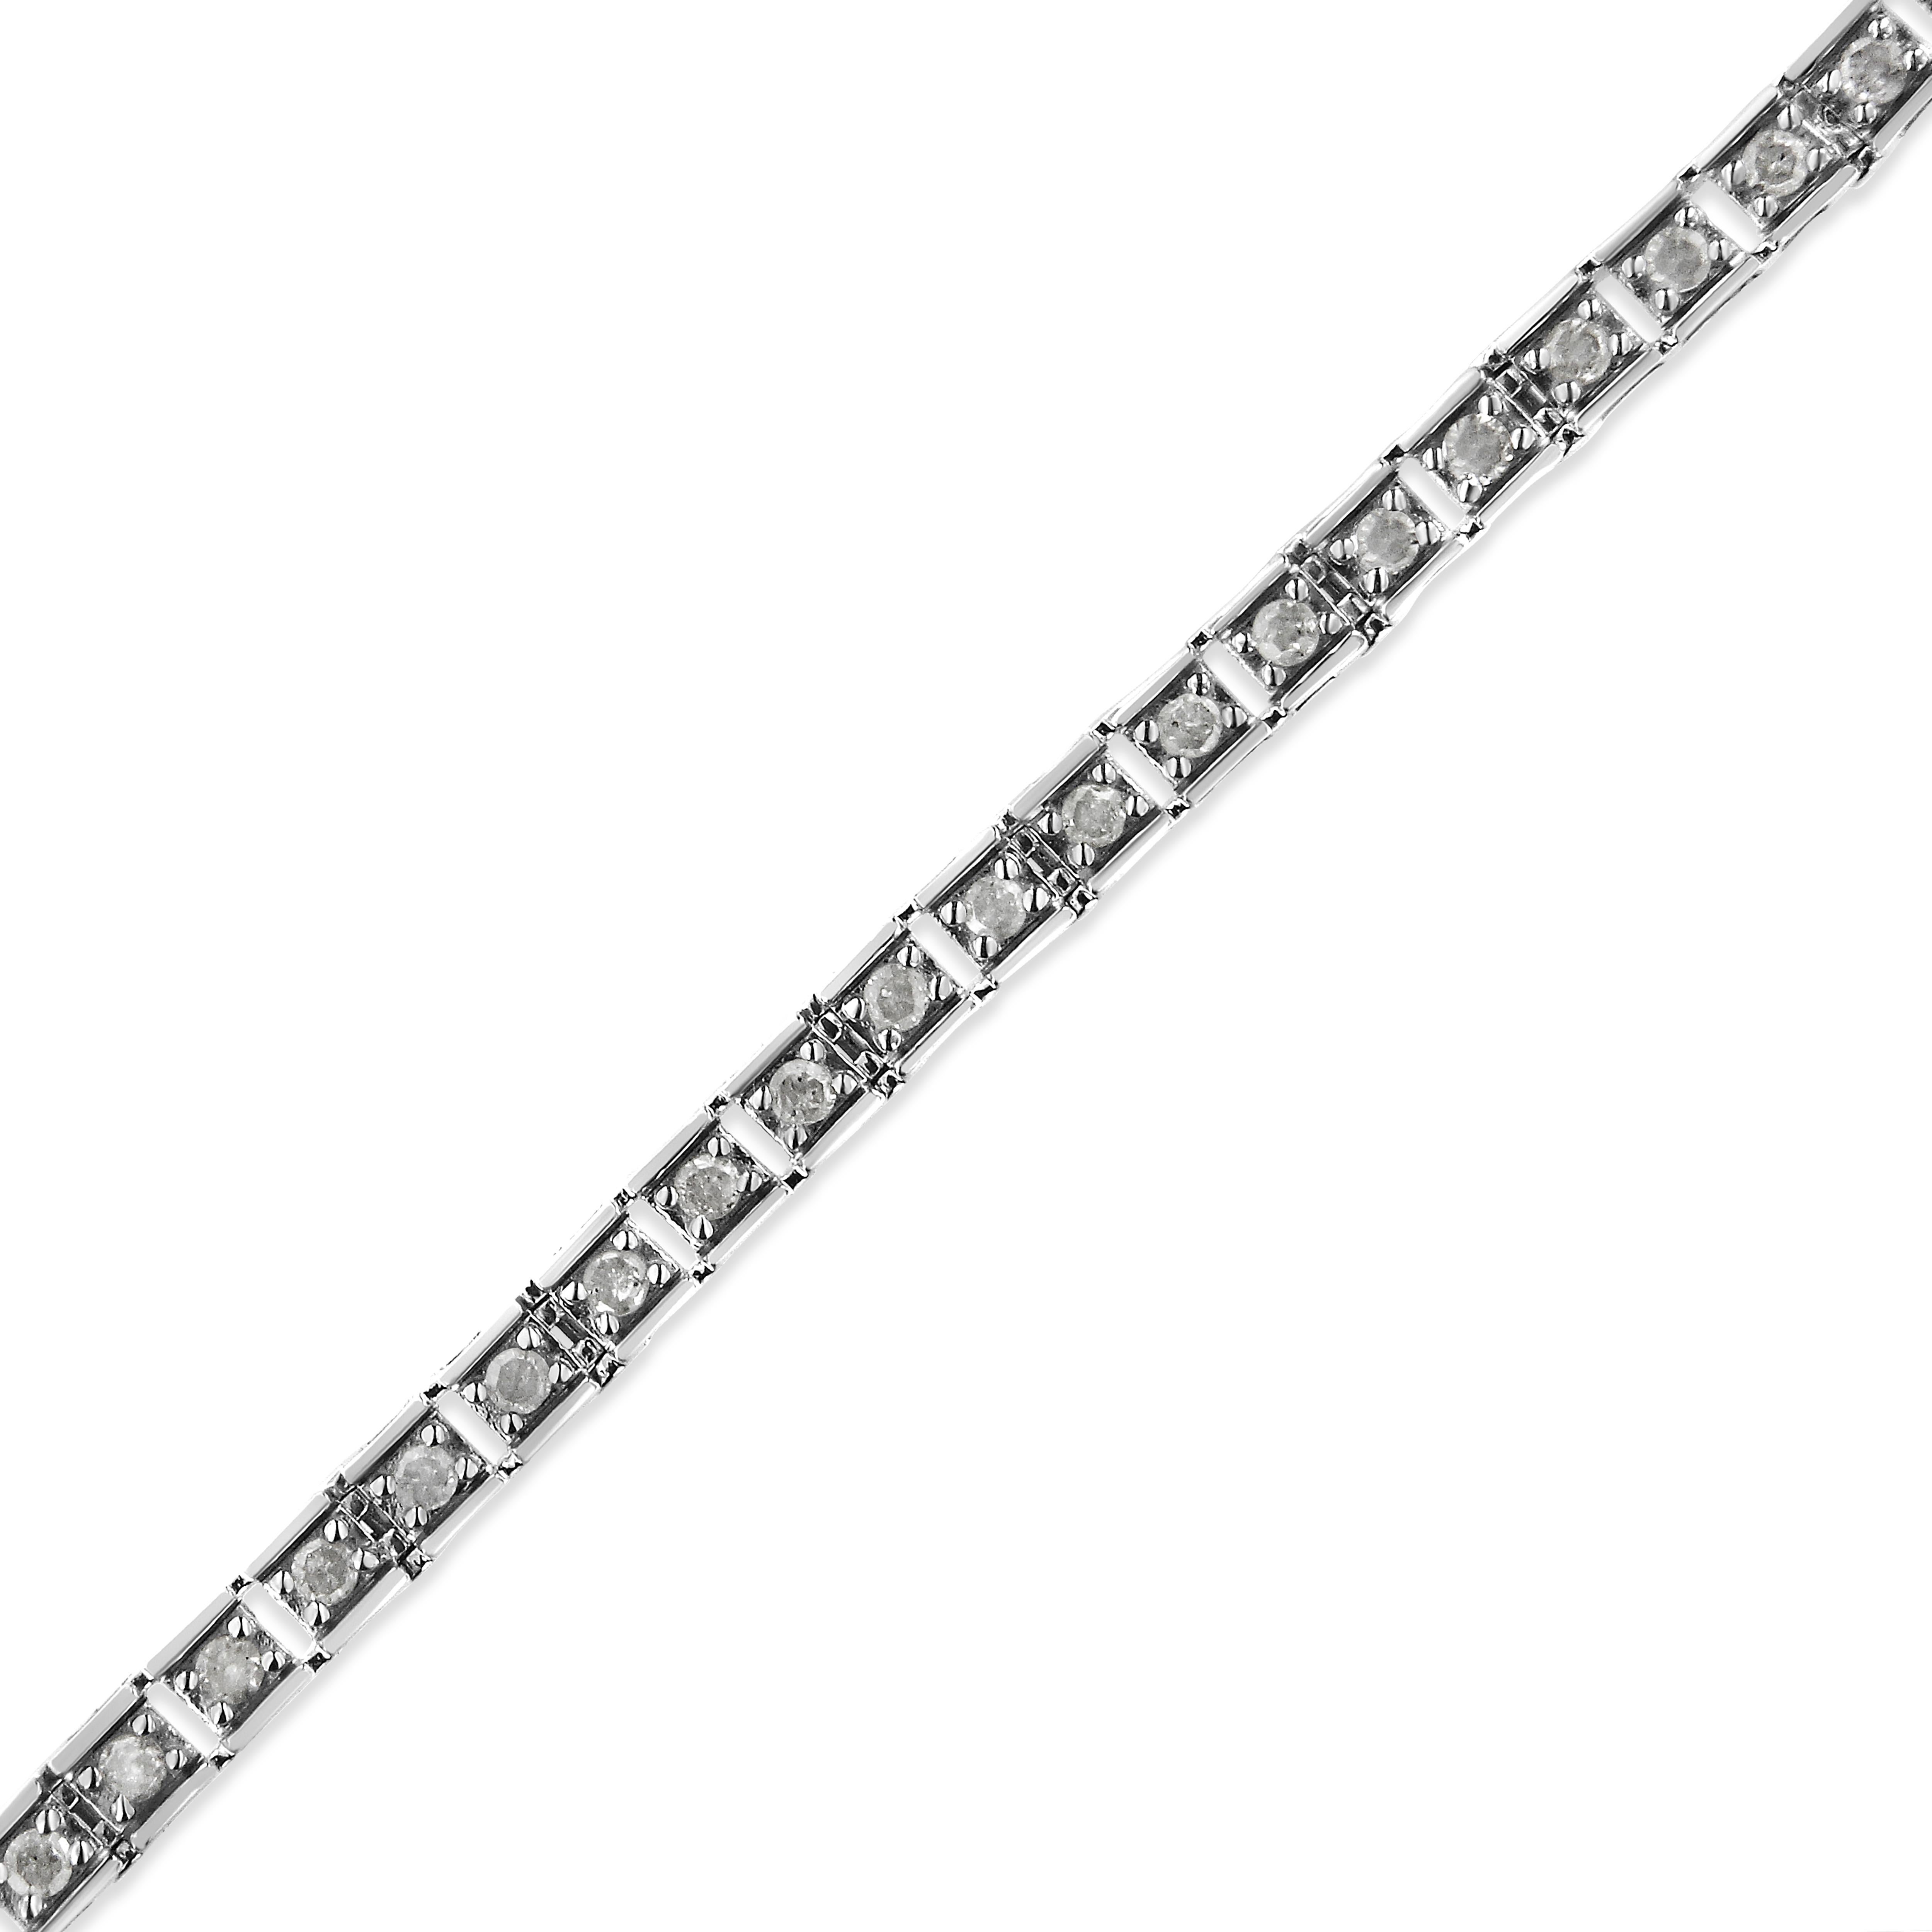 Elegant and timeless, this sterling silver tennis bracelet features 1.0 carat total weight of round, brilliant cut diamonds with a whopping 50 stones in all. The tennis bracelet has multiple hinged links consisting of three prong set diamonds each